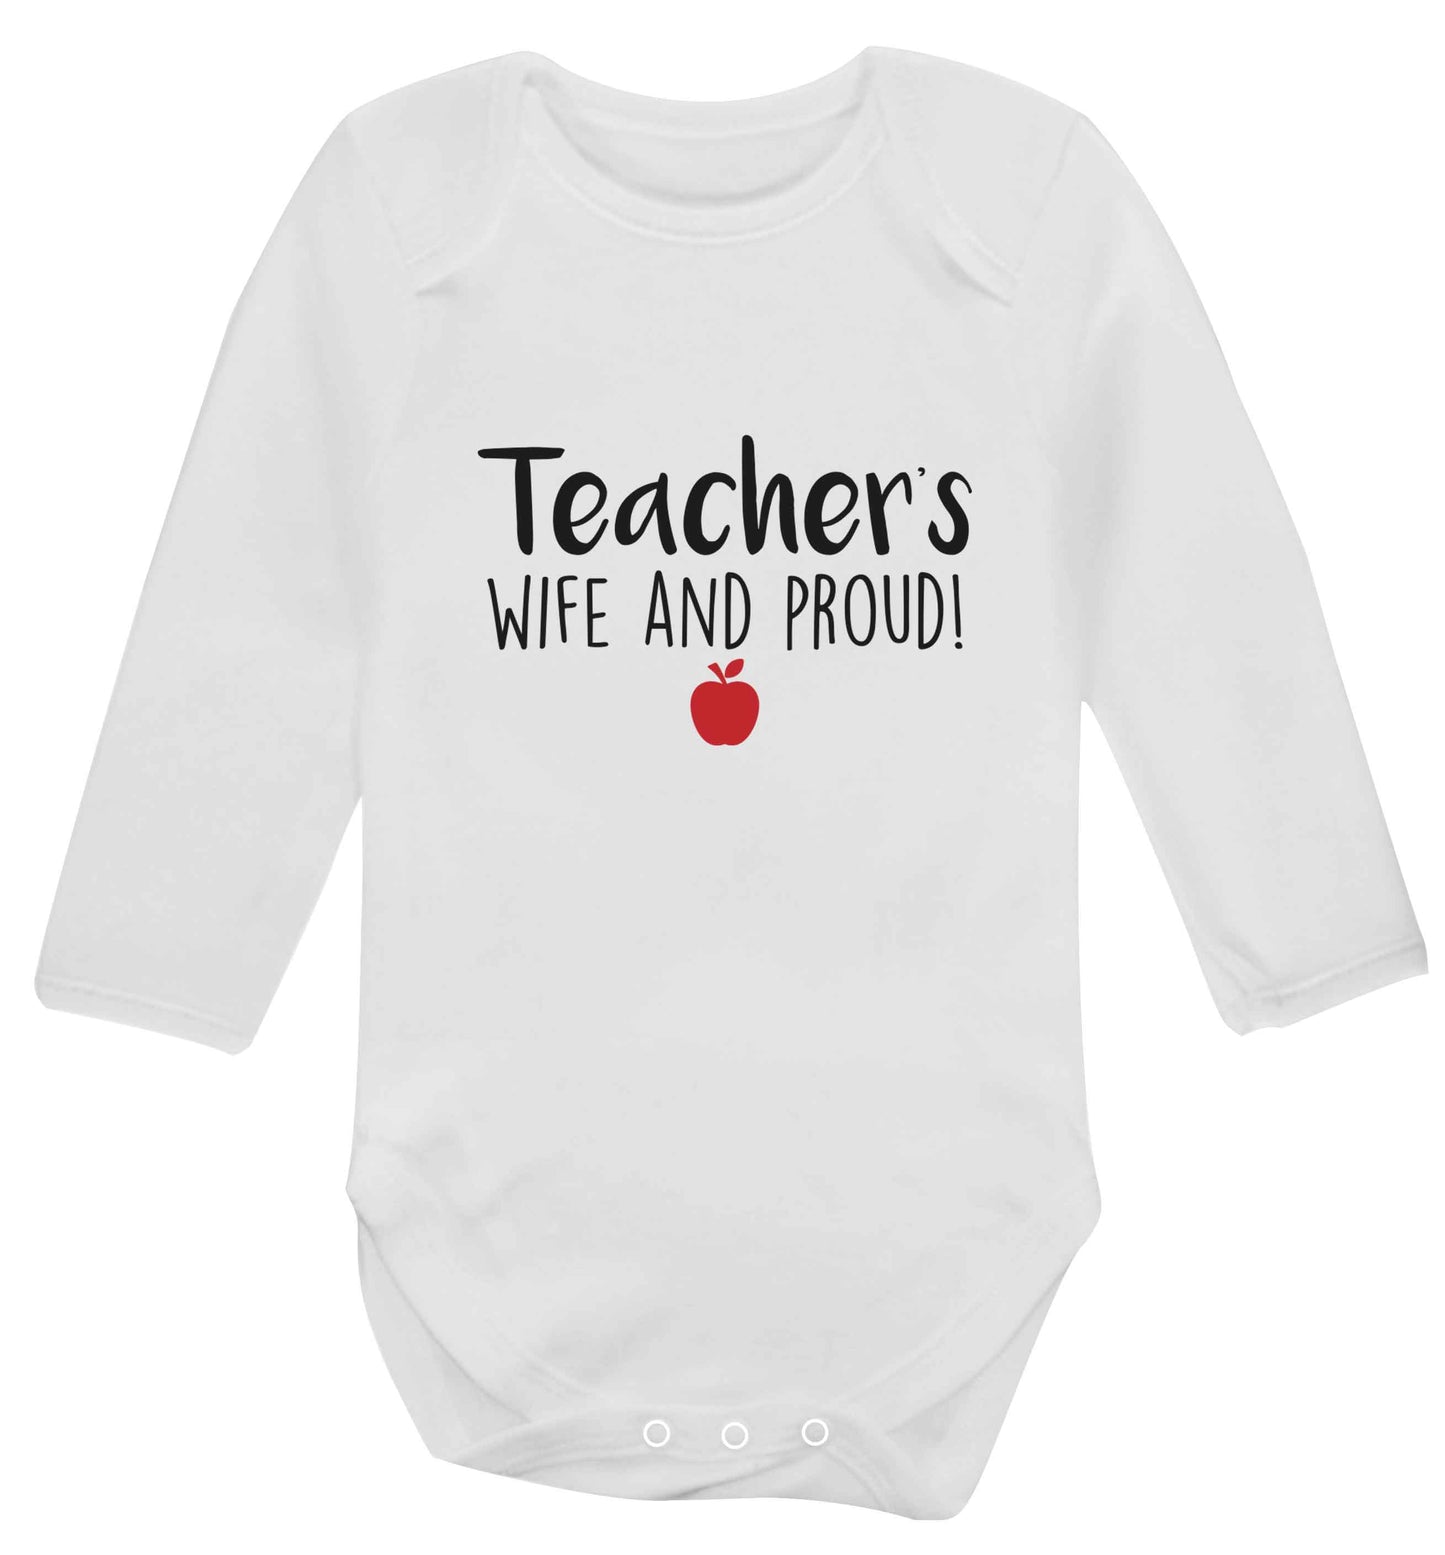 Teachers wife and proud baby vest long sleeved white 6-12 months